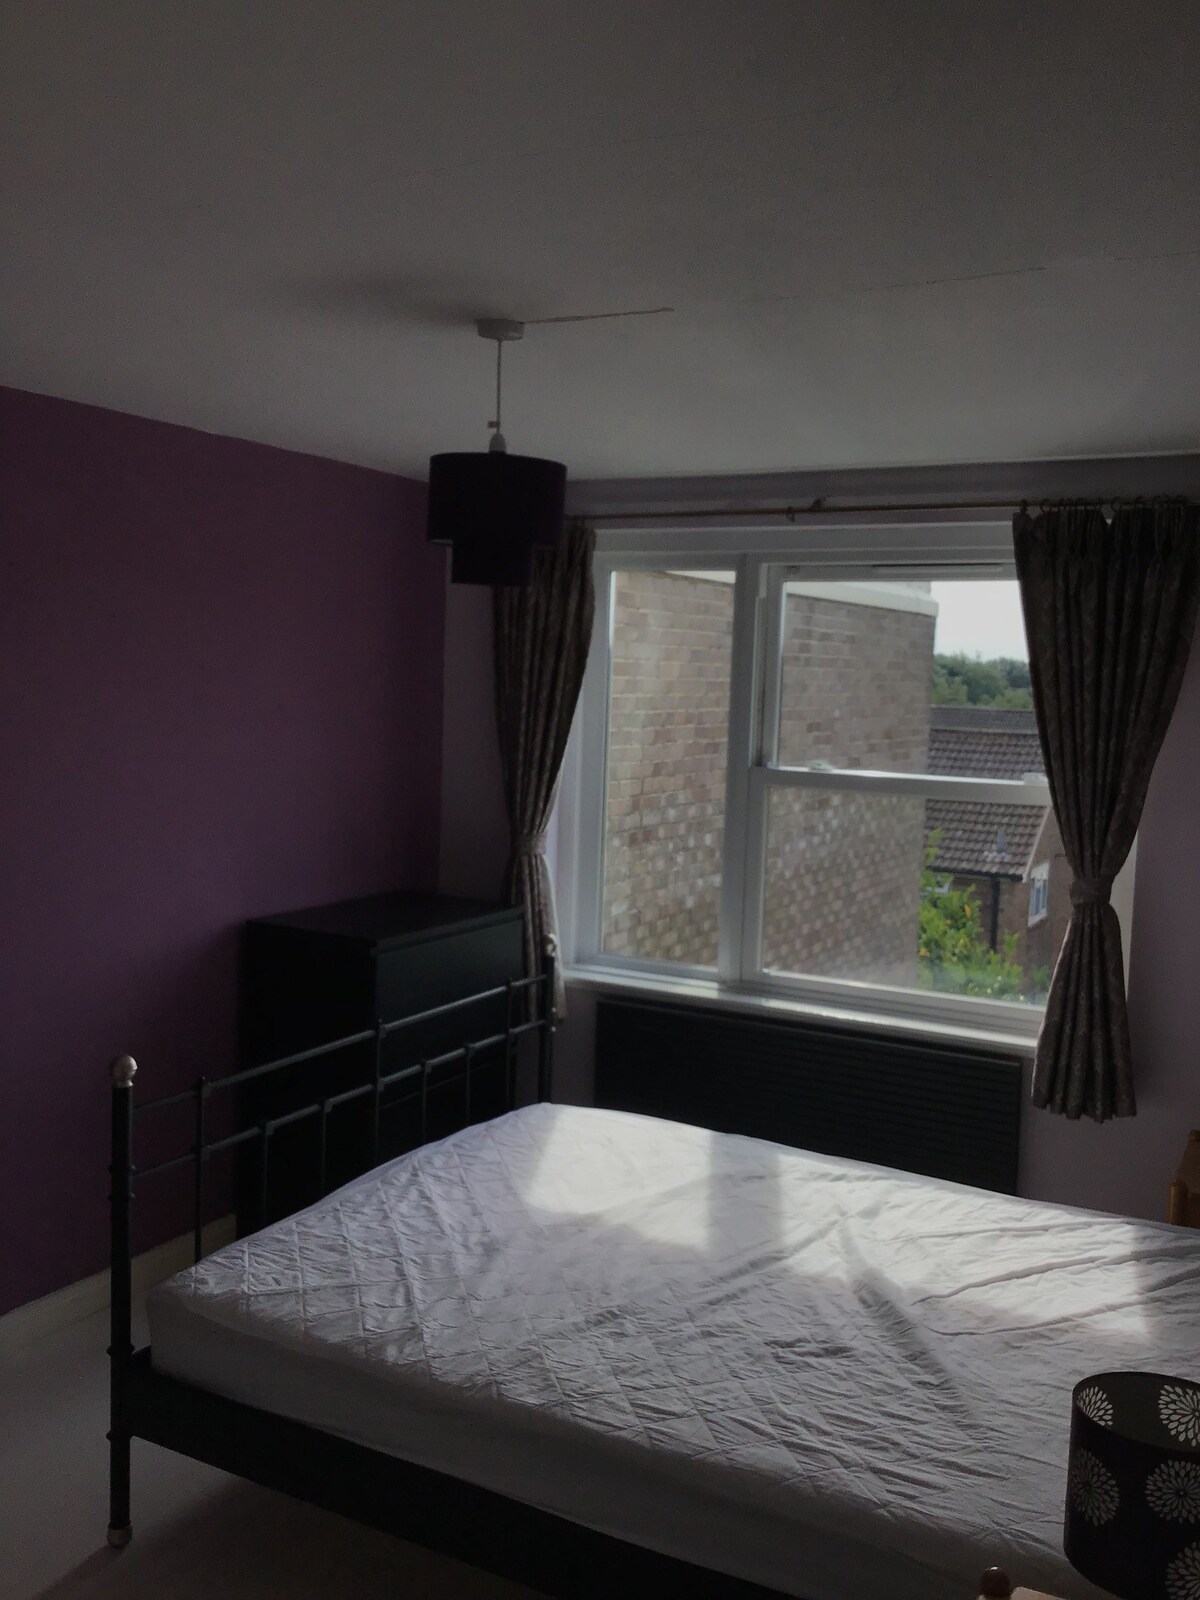 Two bedroom flat, North Oxford